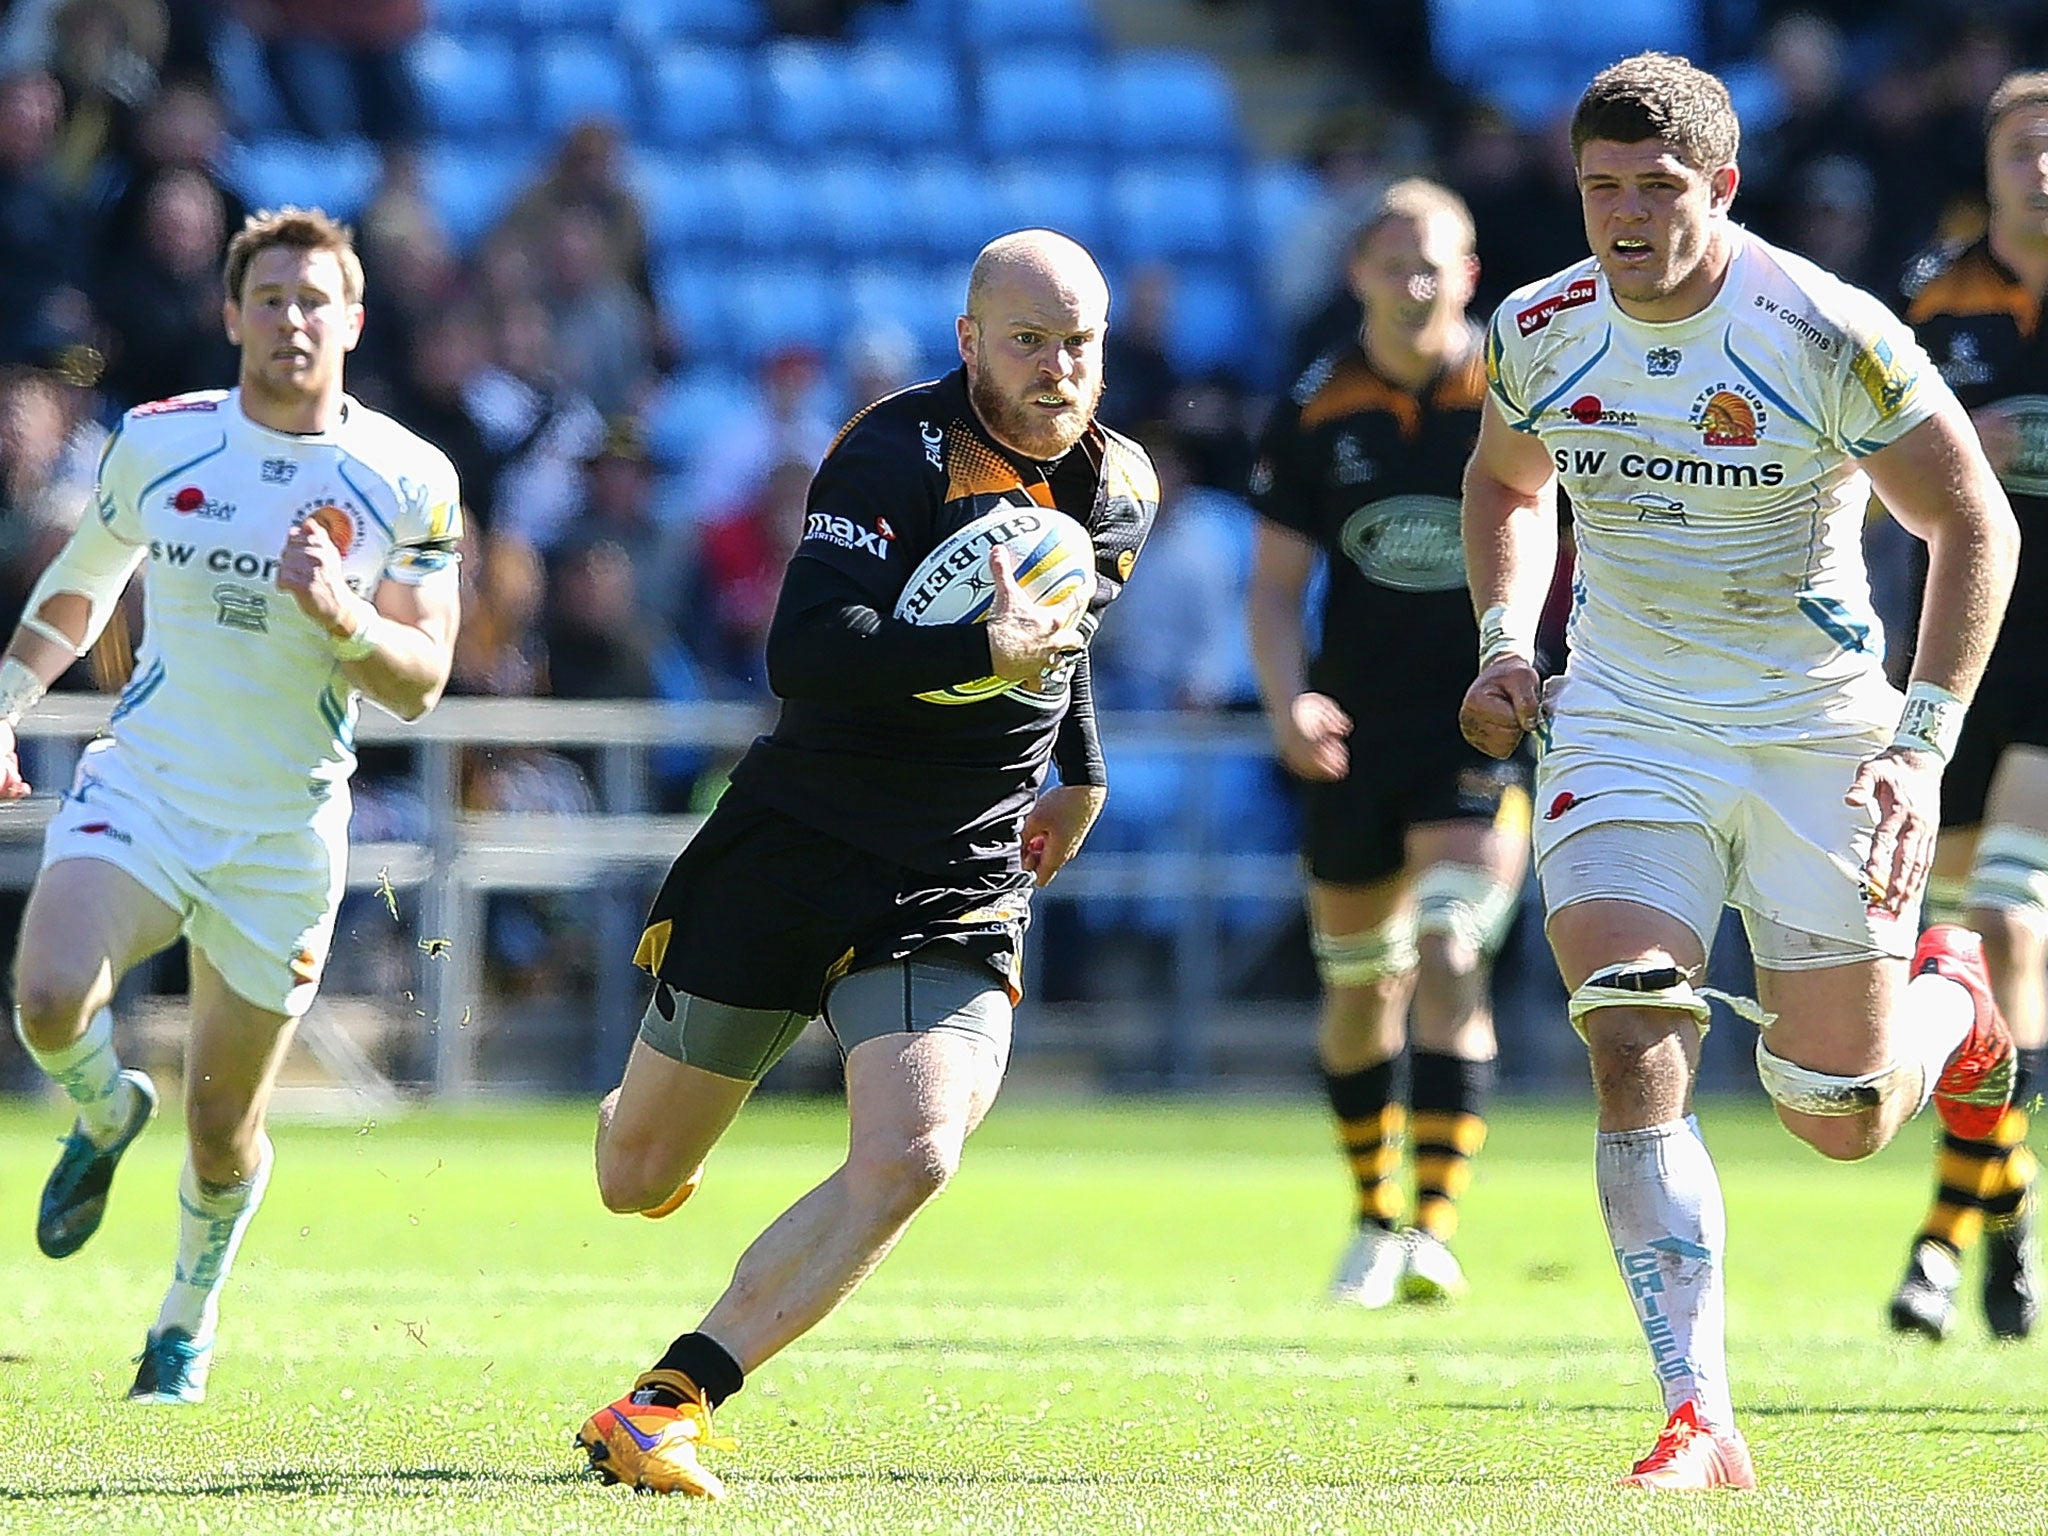 Wasps’ Joe Simpson breaks through the Exeter defence to score his fantastic late try